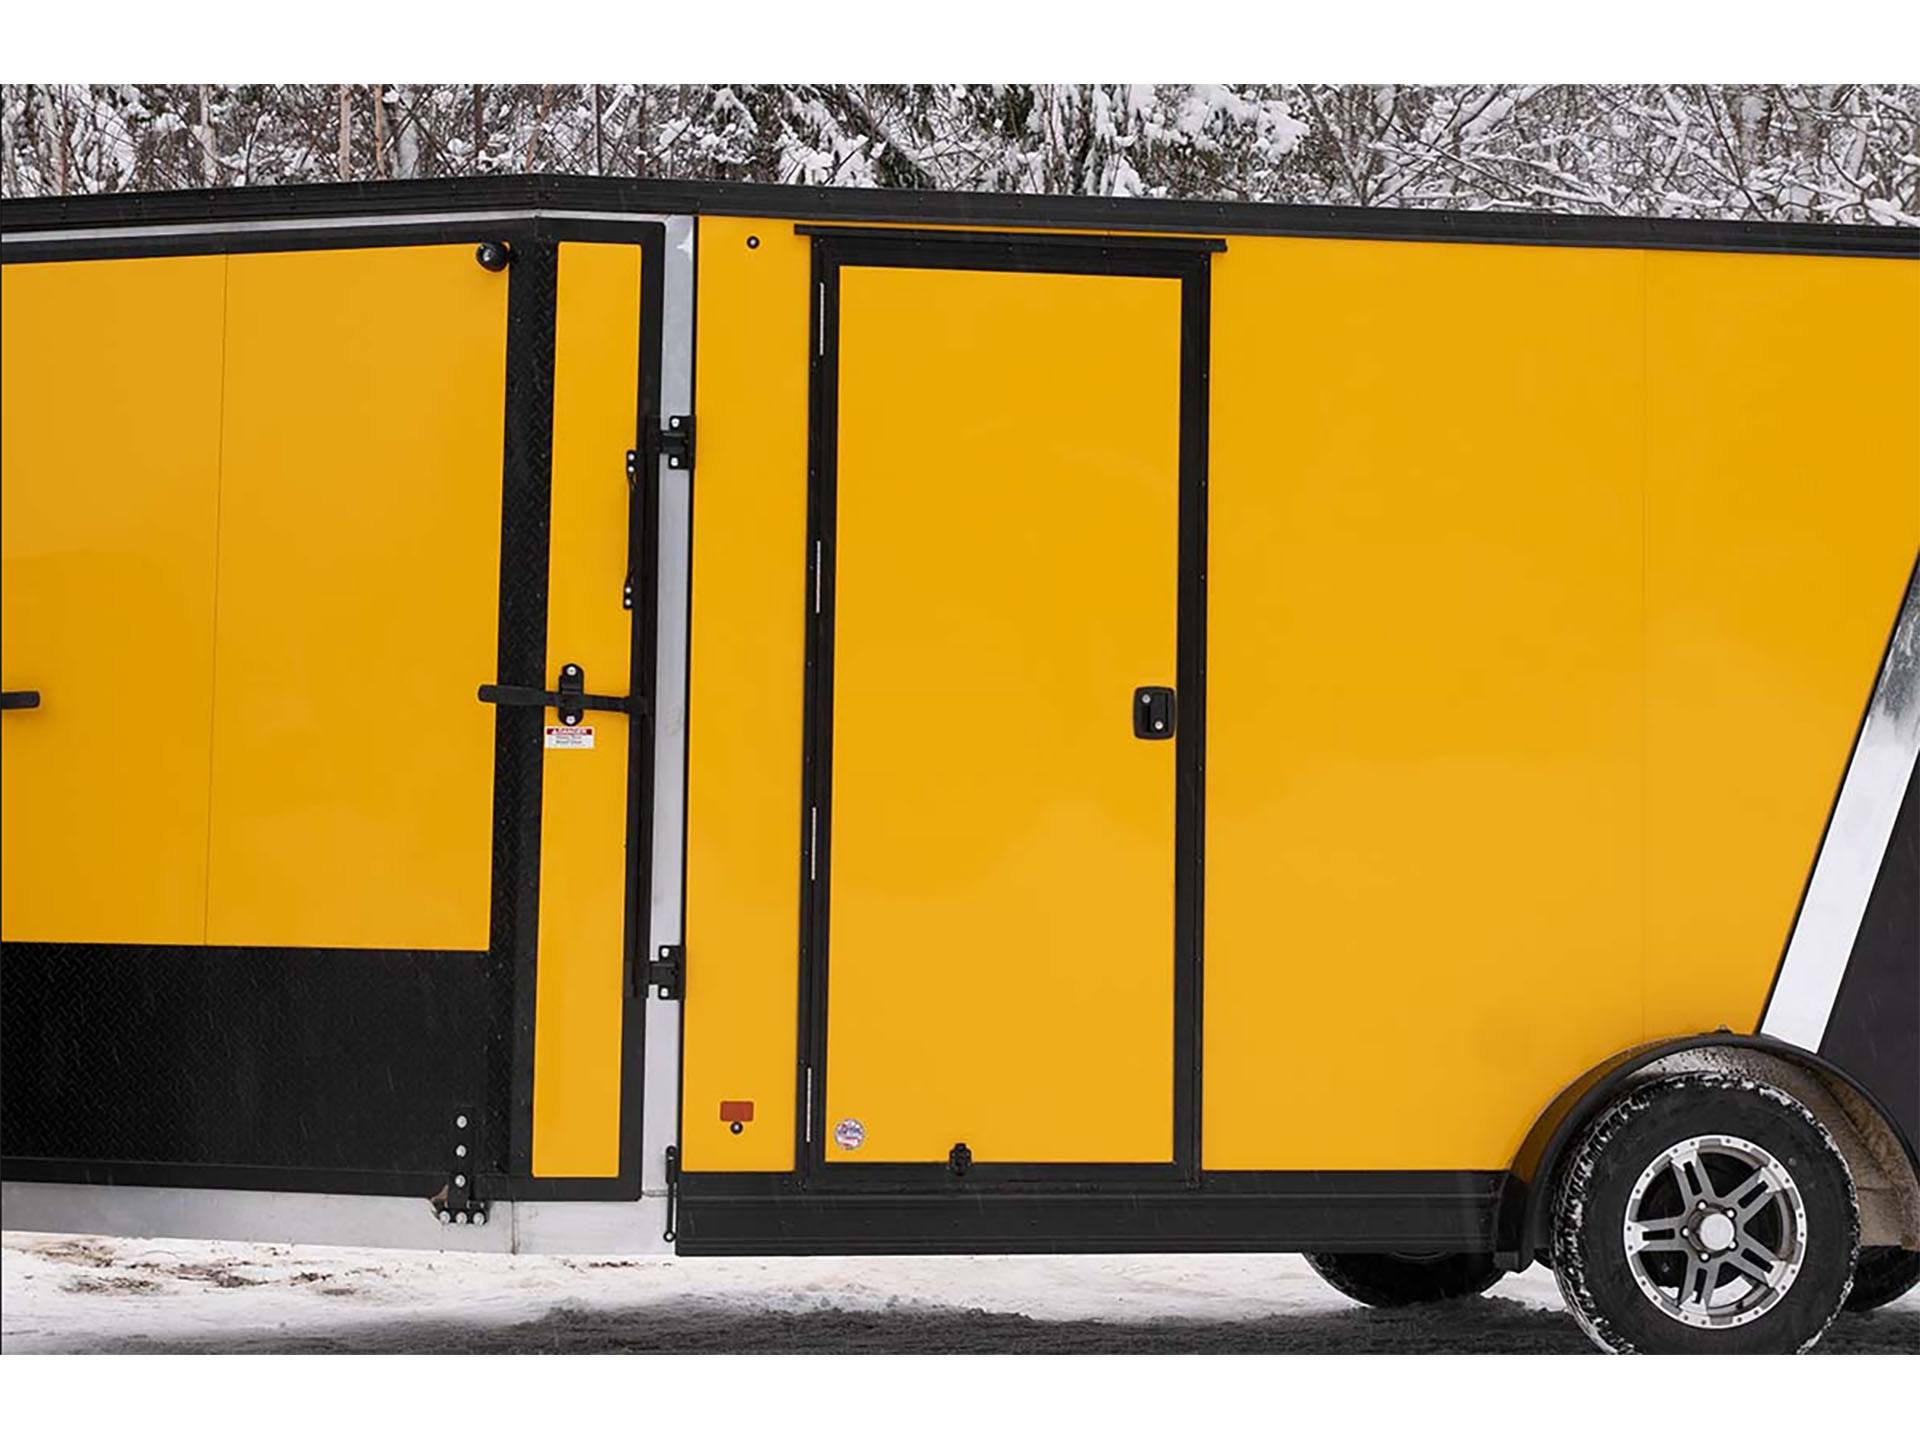 2024 Polaris Trailers Enclosed Cargo Trailers 7 ft. Wide - 16 ft. Long in Cottonwood, Idaho - Photo 6